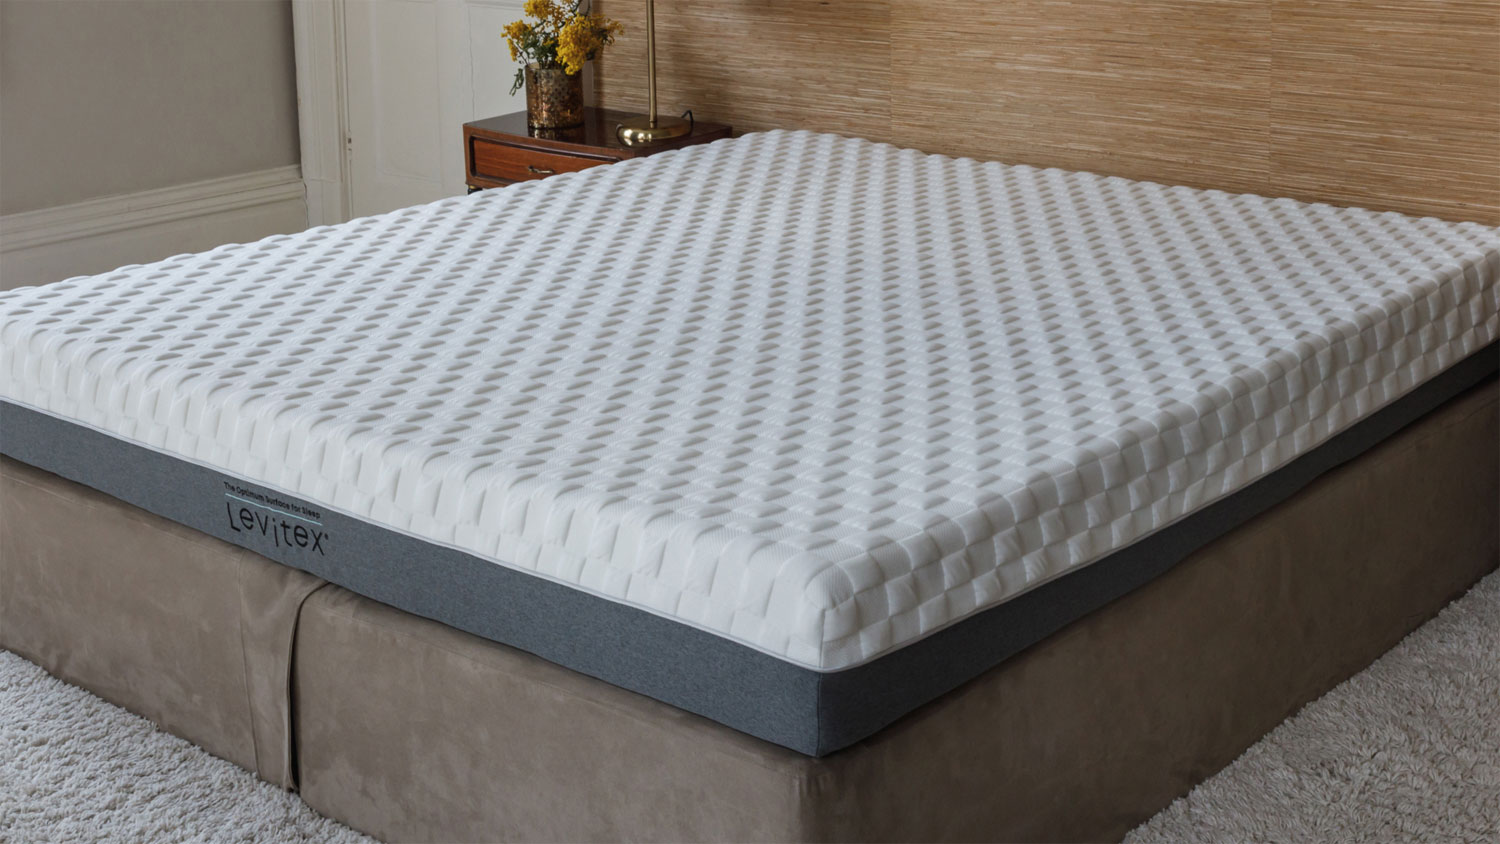 The Levitex Gravity Defying Mattress on a bed